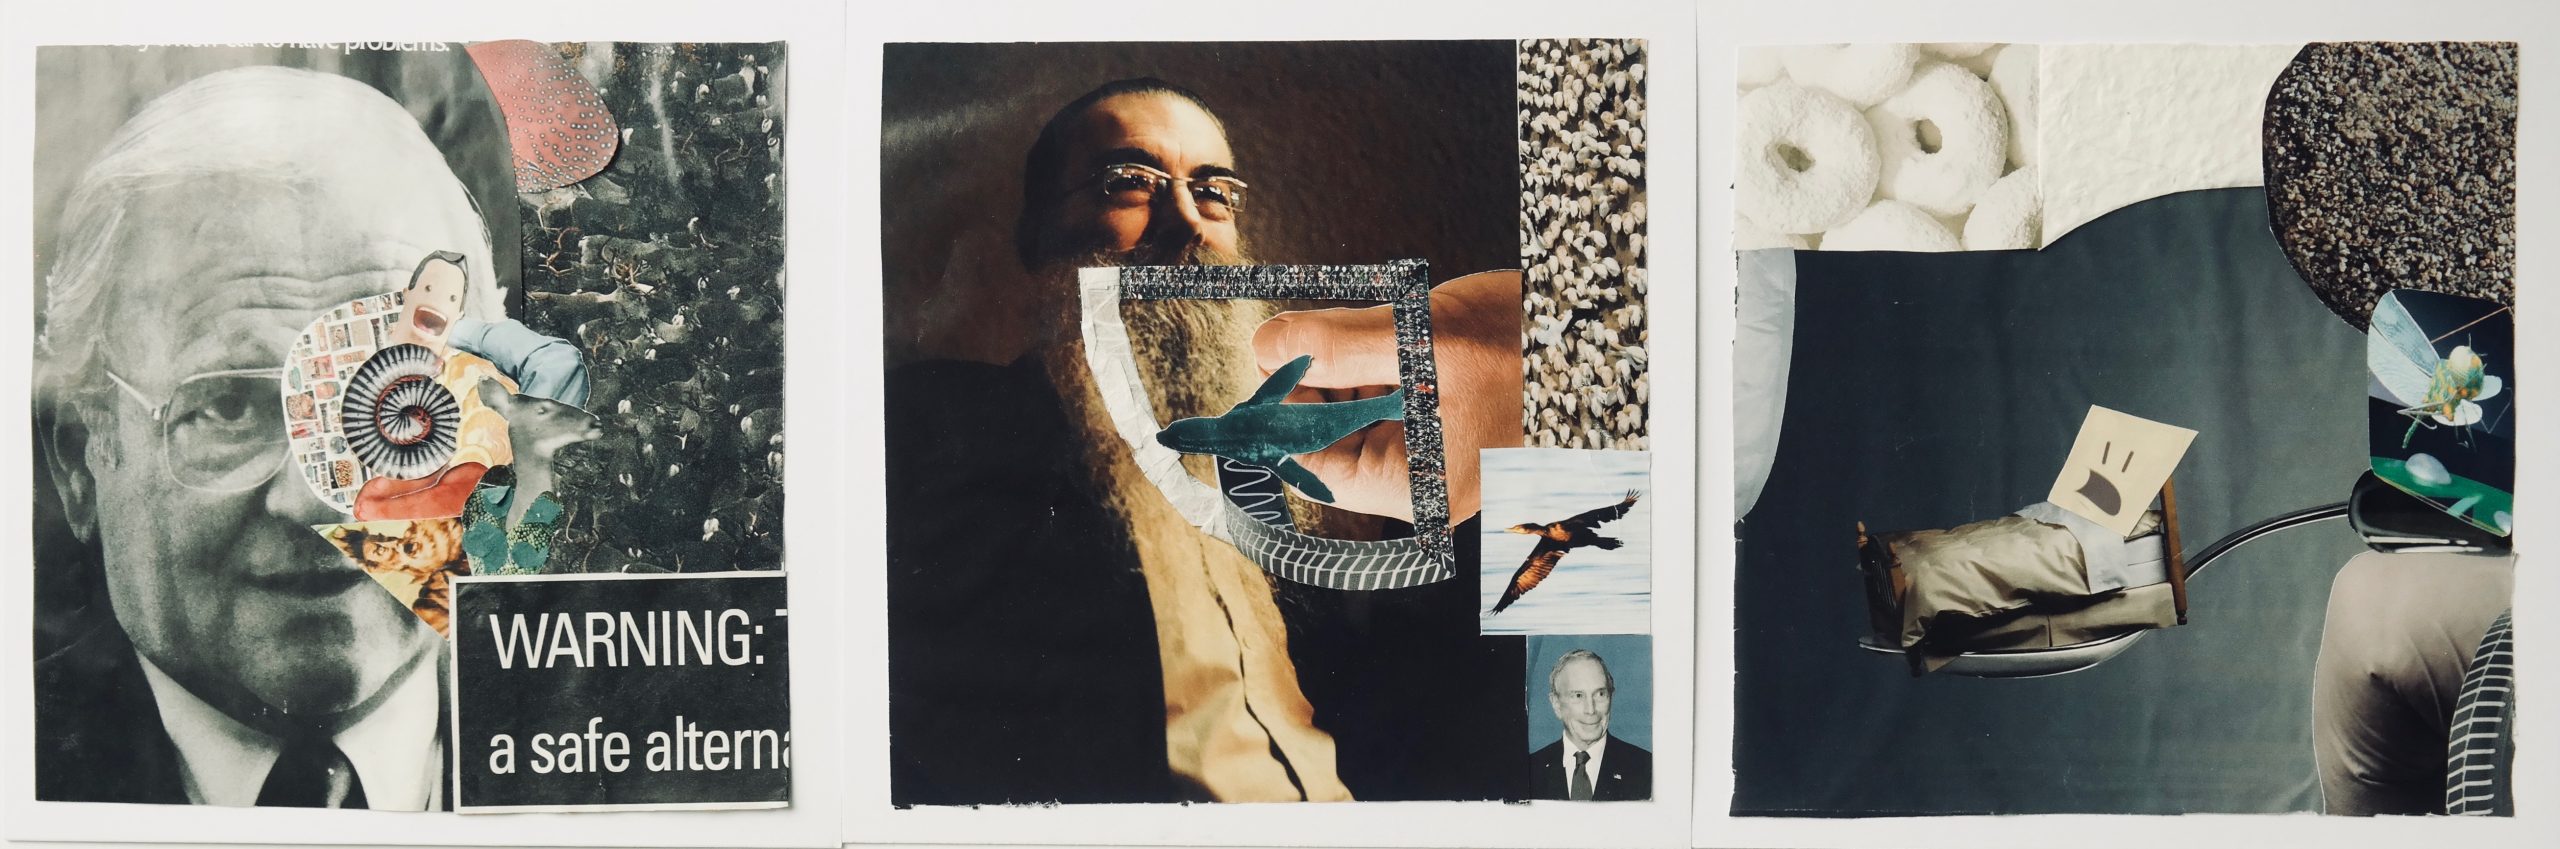 Dustin H. ’20, untitled collage series, 2018